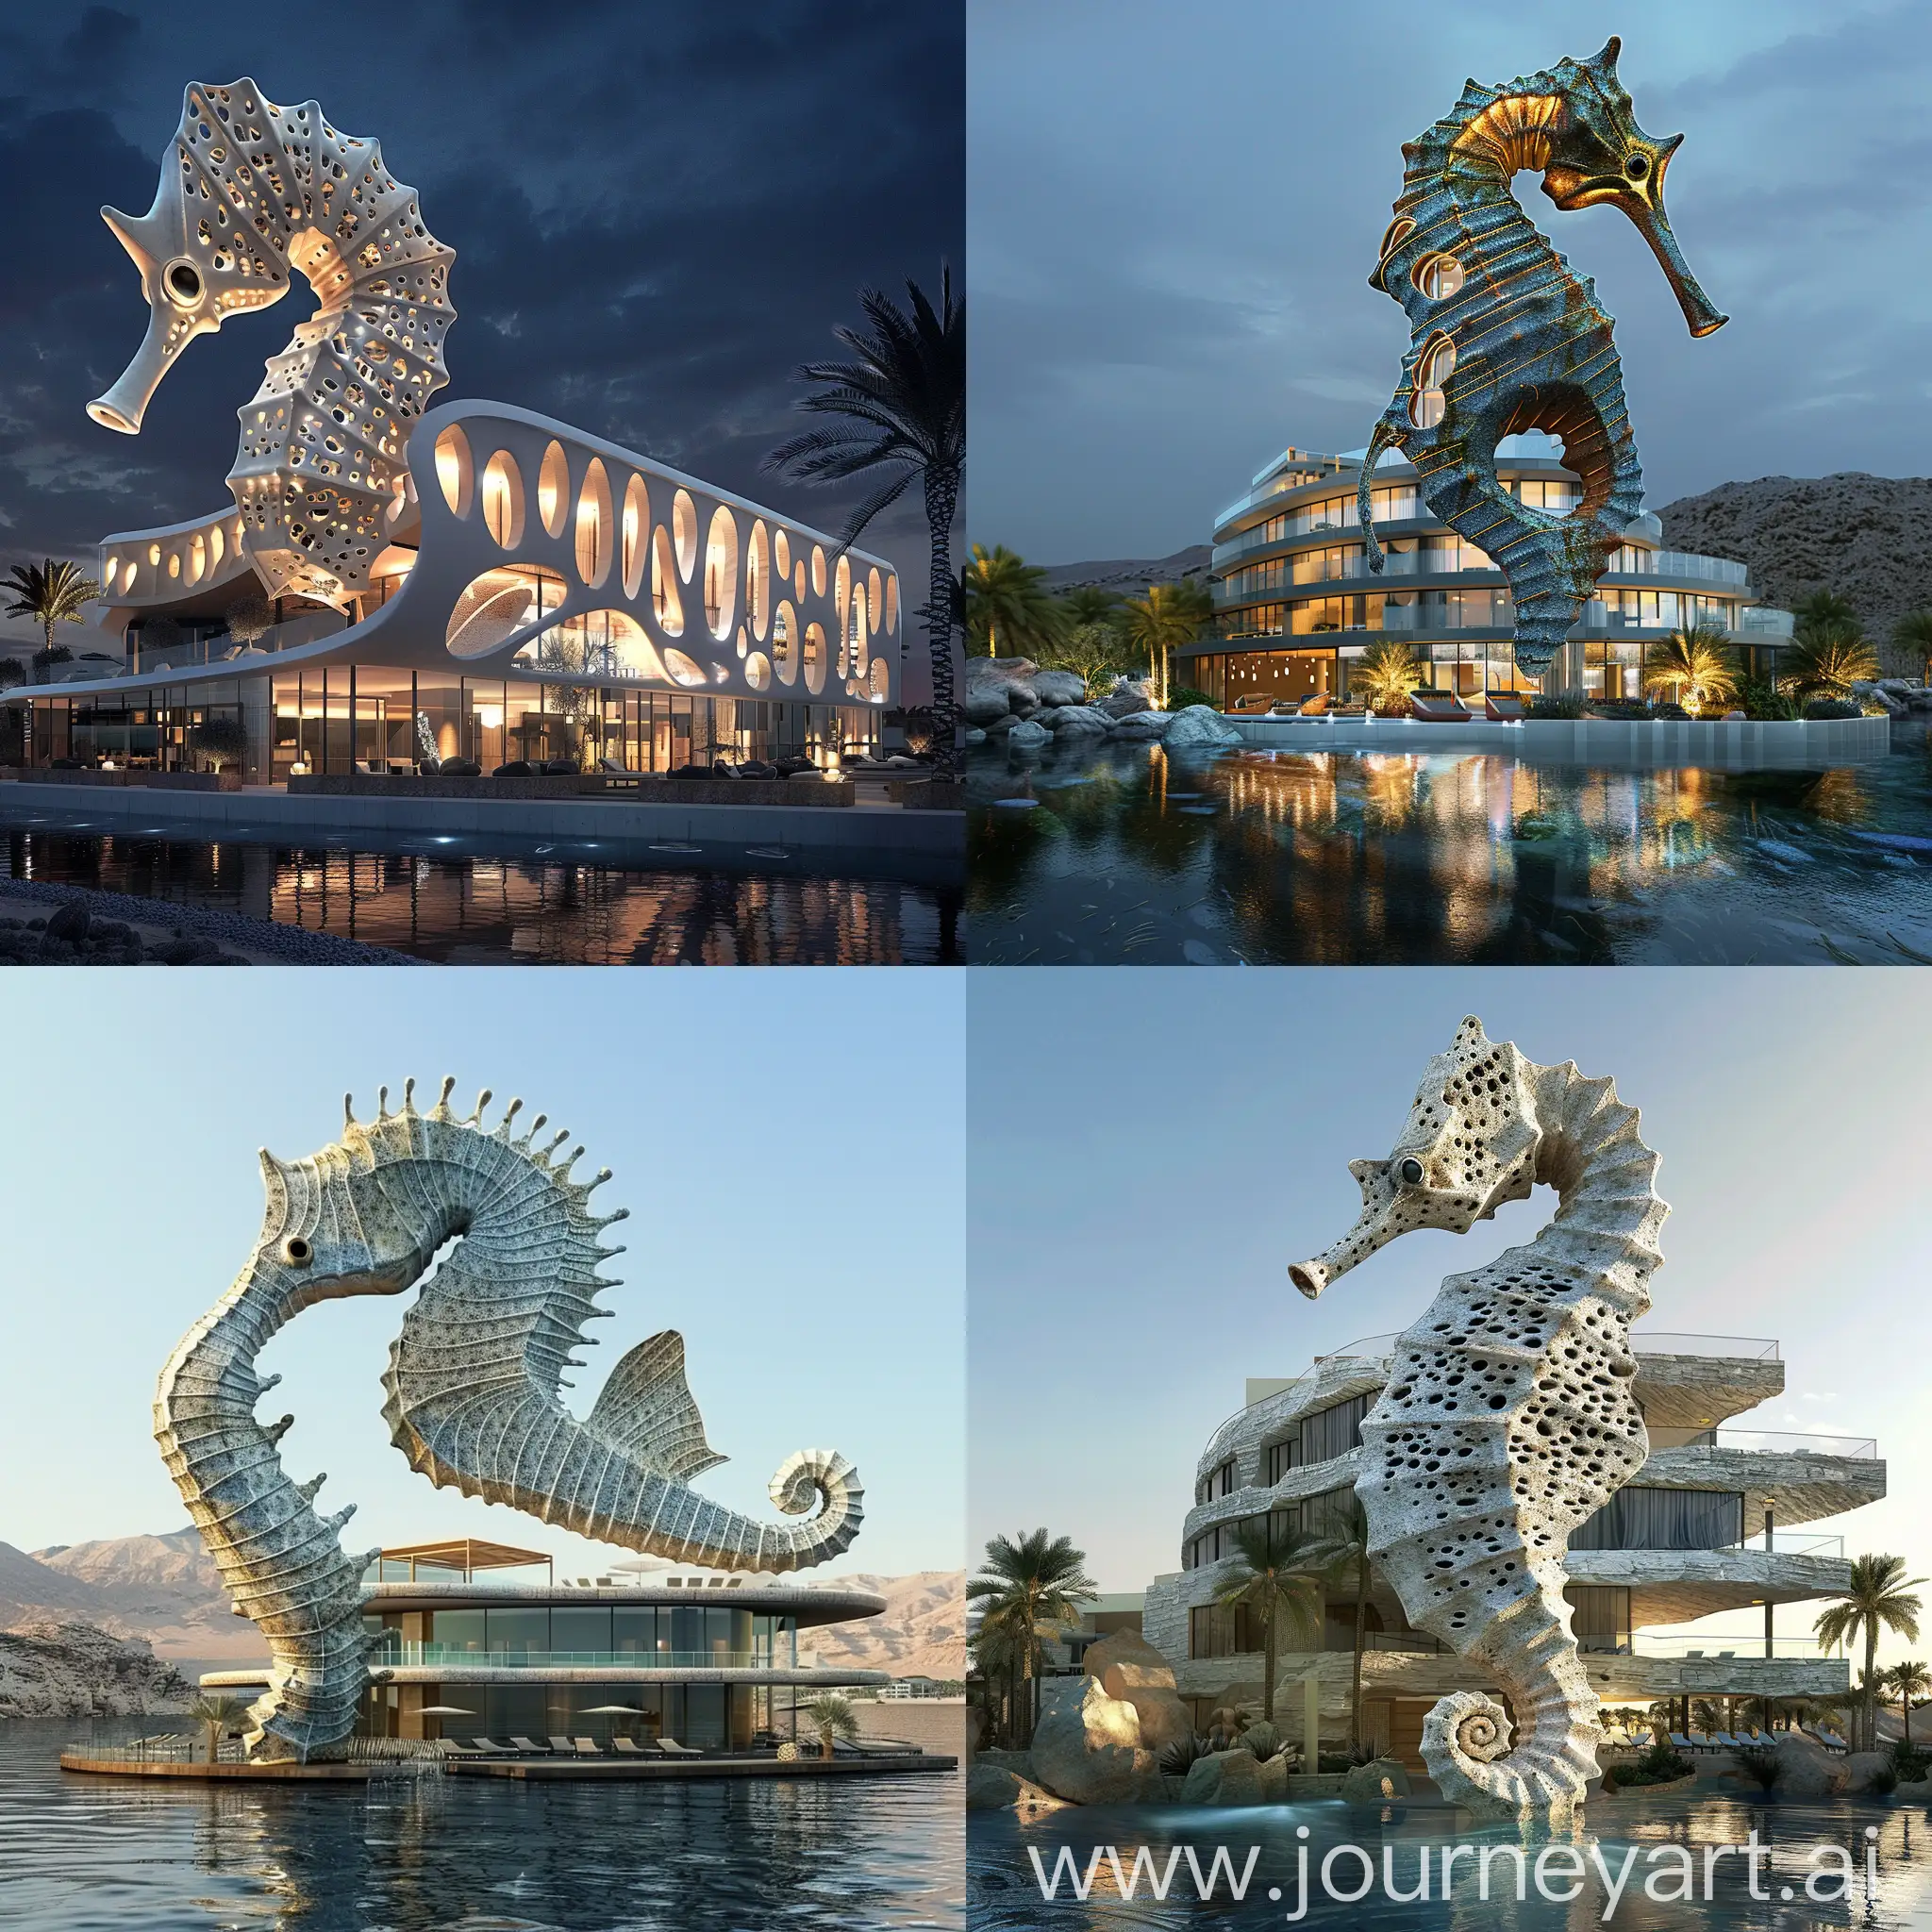 generate an hotel in sharm el sheikh that has a from inspired from the degradation of the seahorse